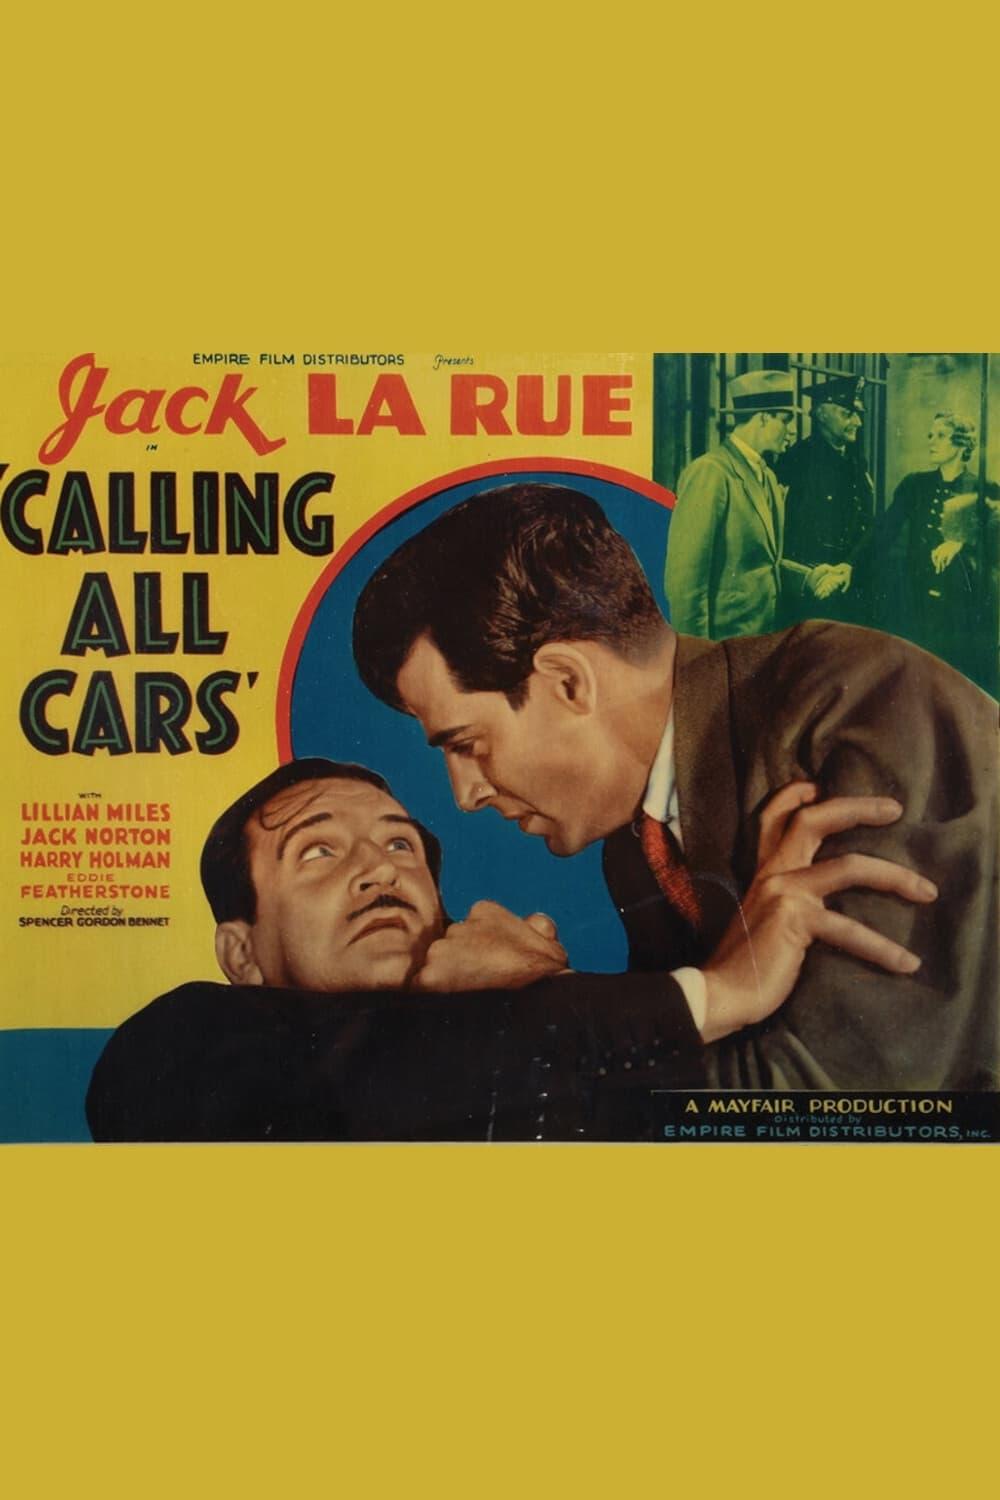 Calling All Cars poster